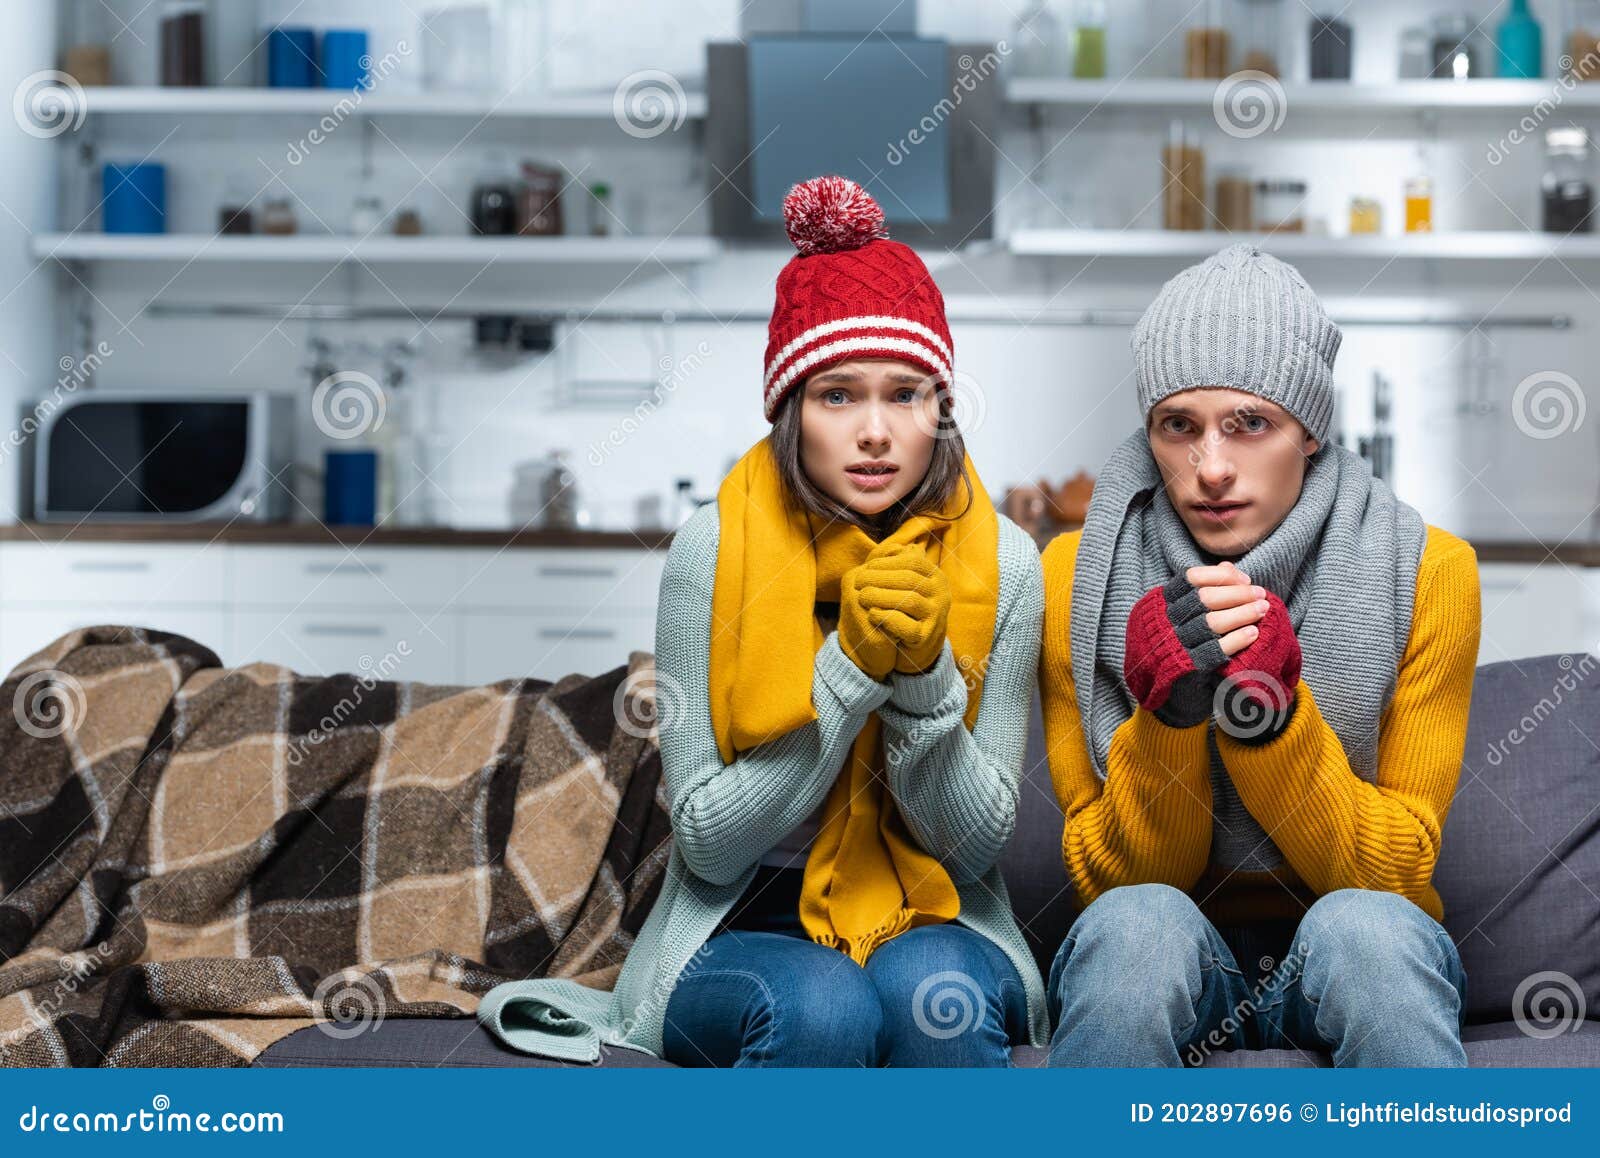 couple in warm hats and gloves